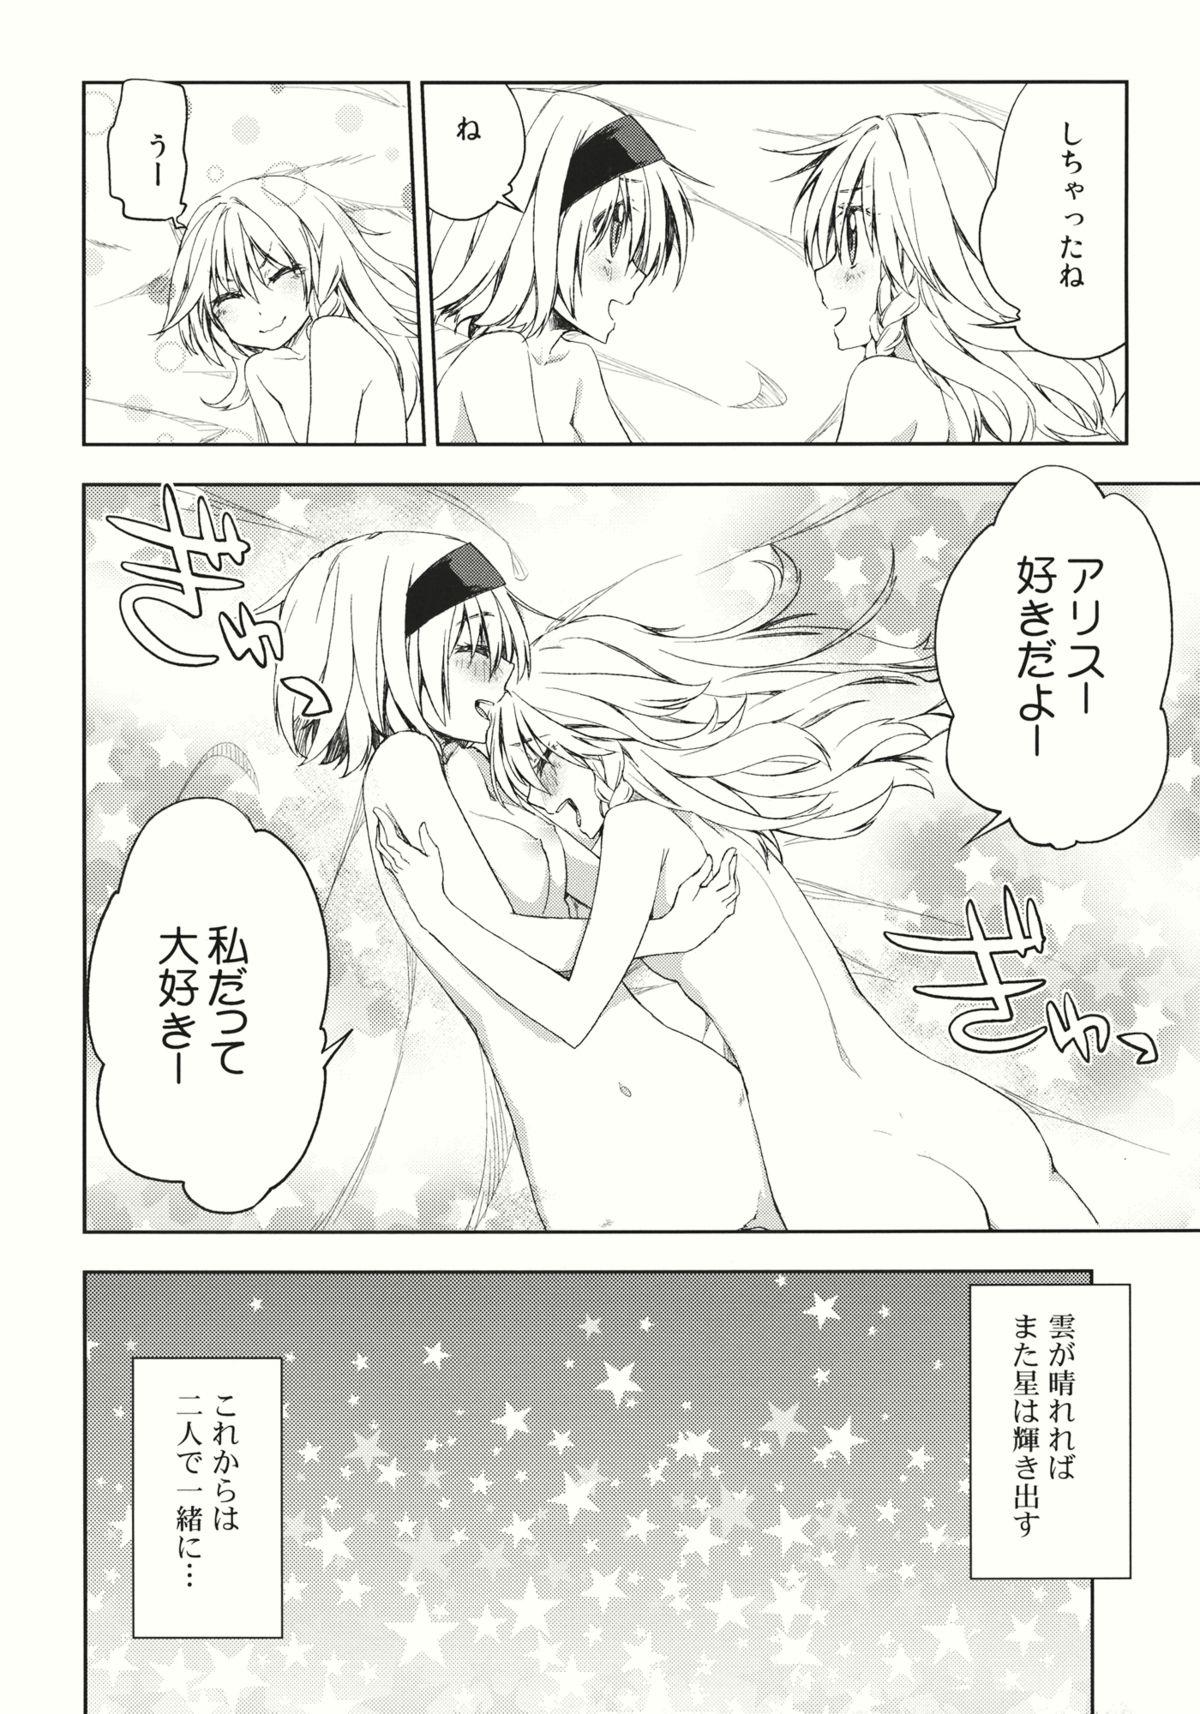 Por twinkle star - Touhou project Barely 18 Porn - Page 24